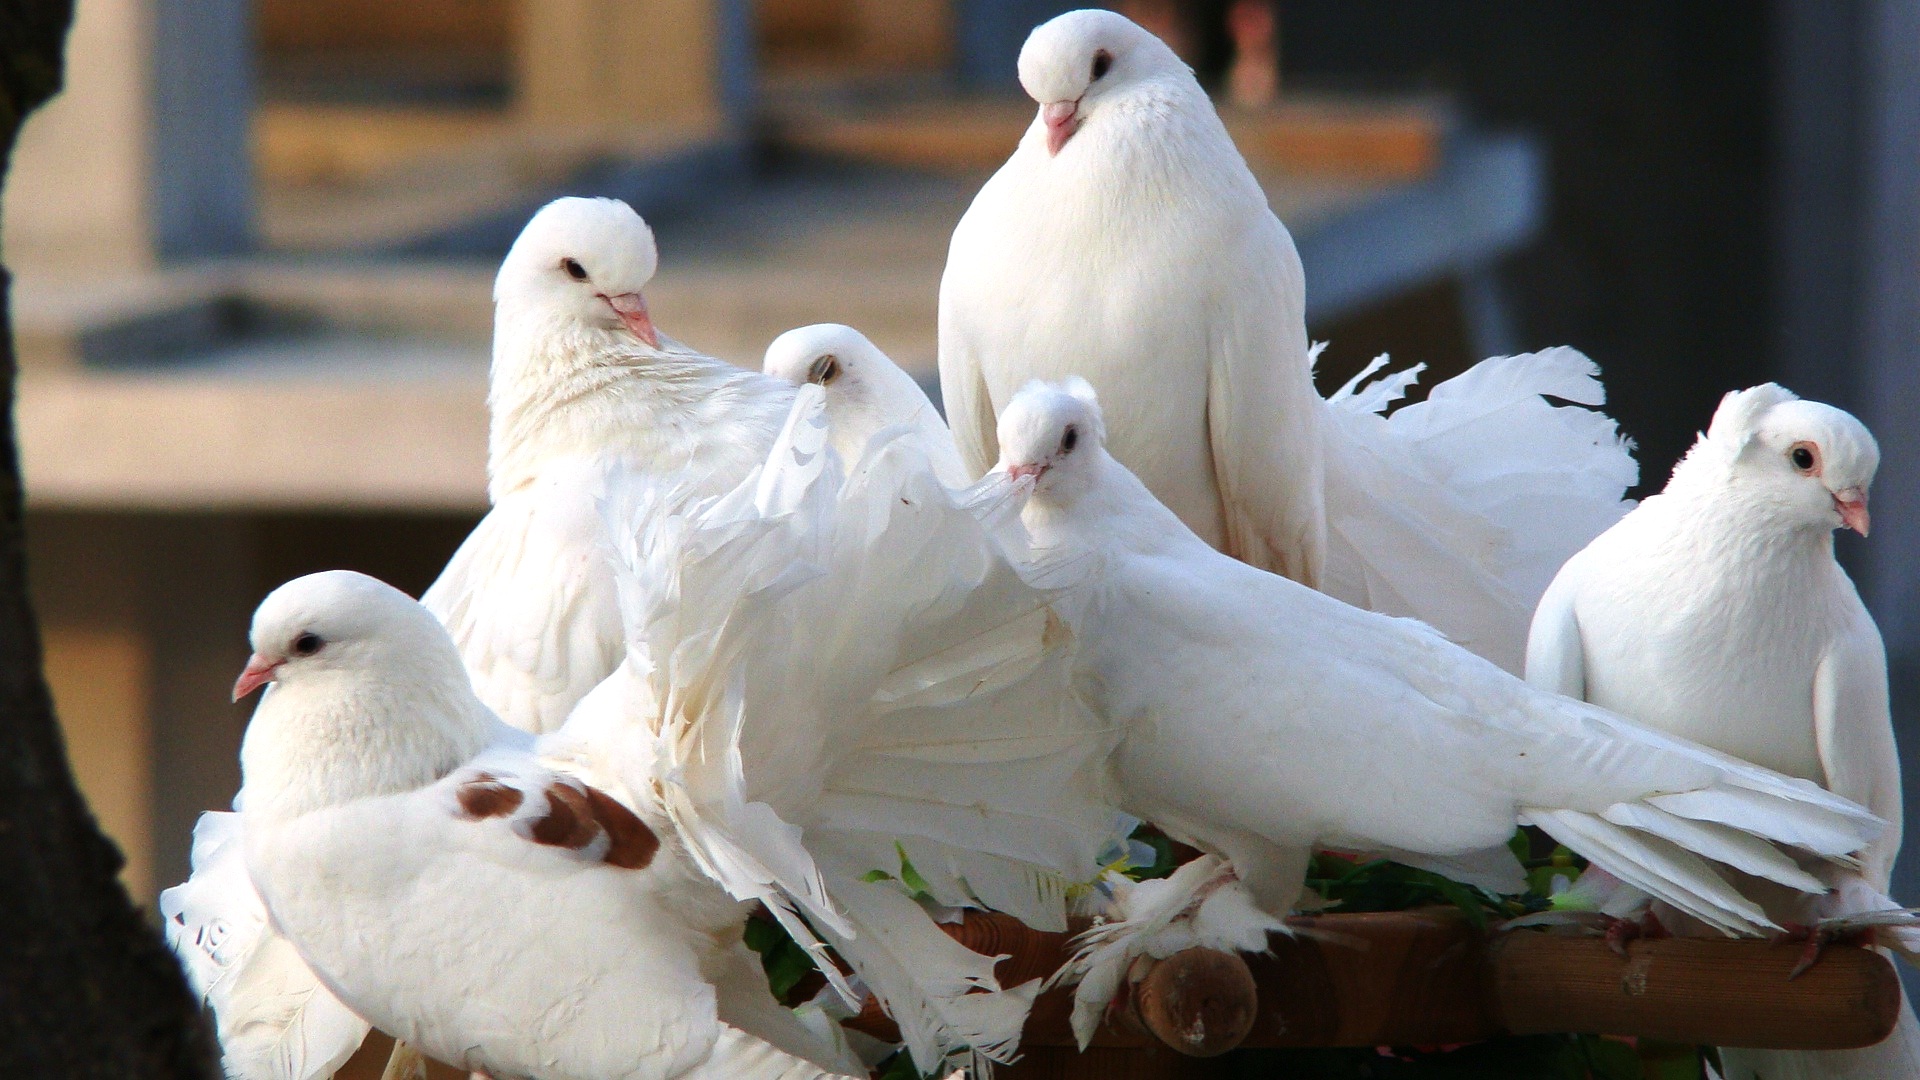 White pigeon birds group nice pictures - New hd wallpaperNew hd ...